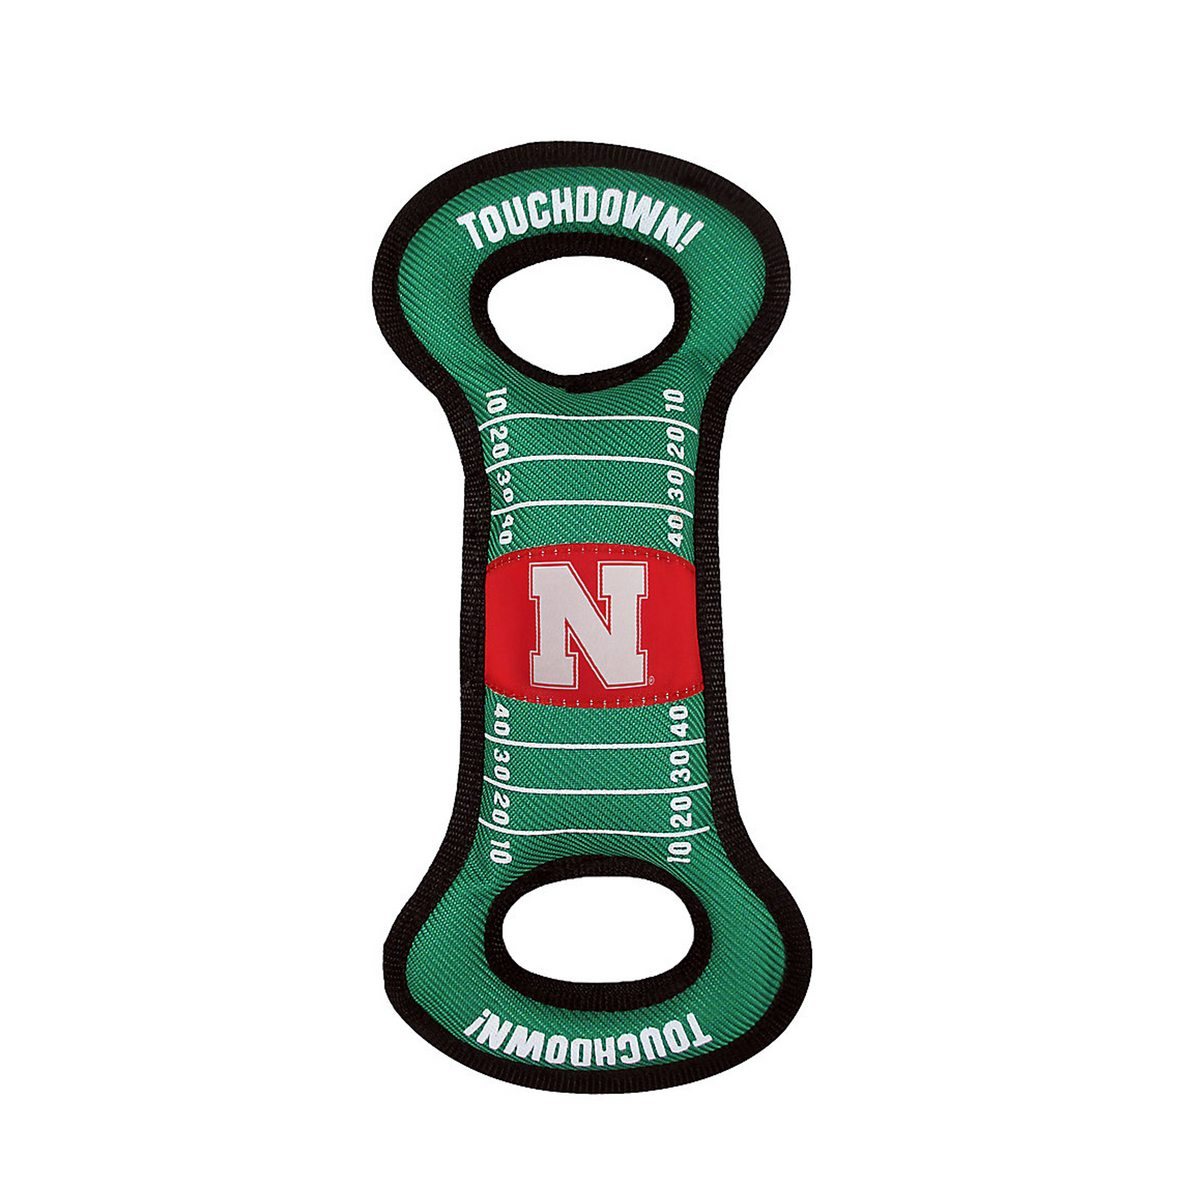 NE Cornhuskers Field Tug Toy - 3 Red Rovers